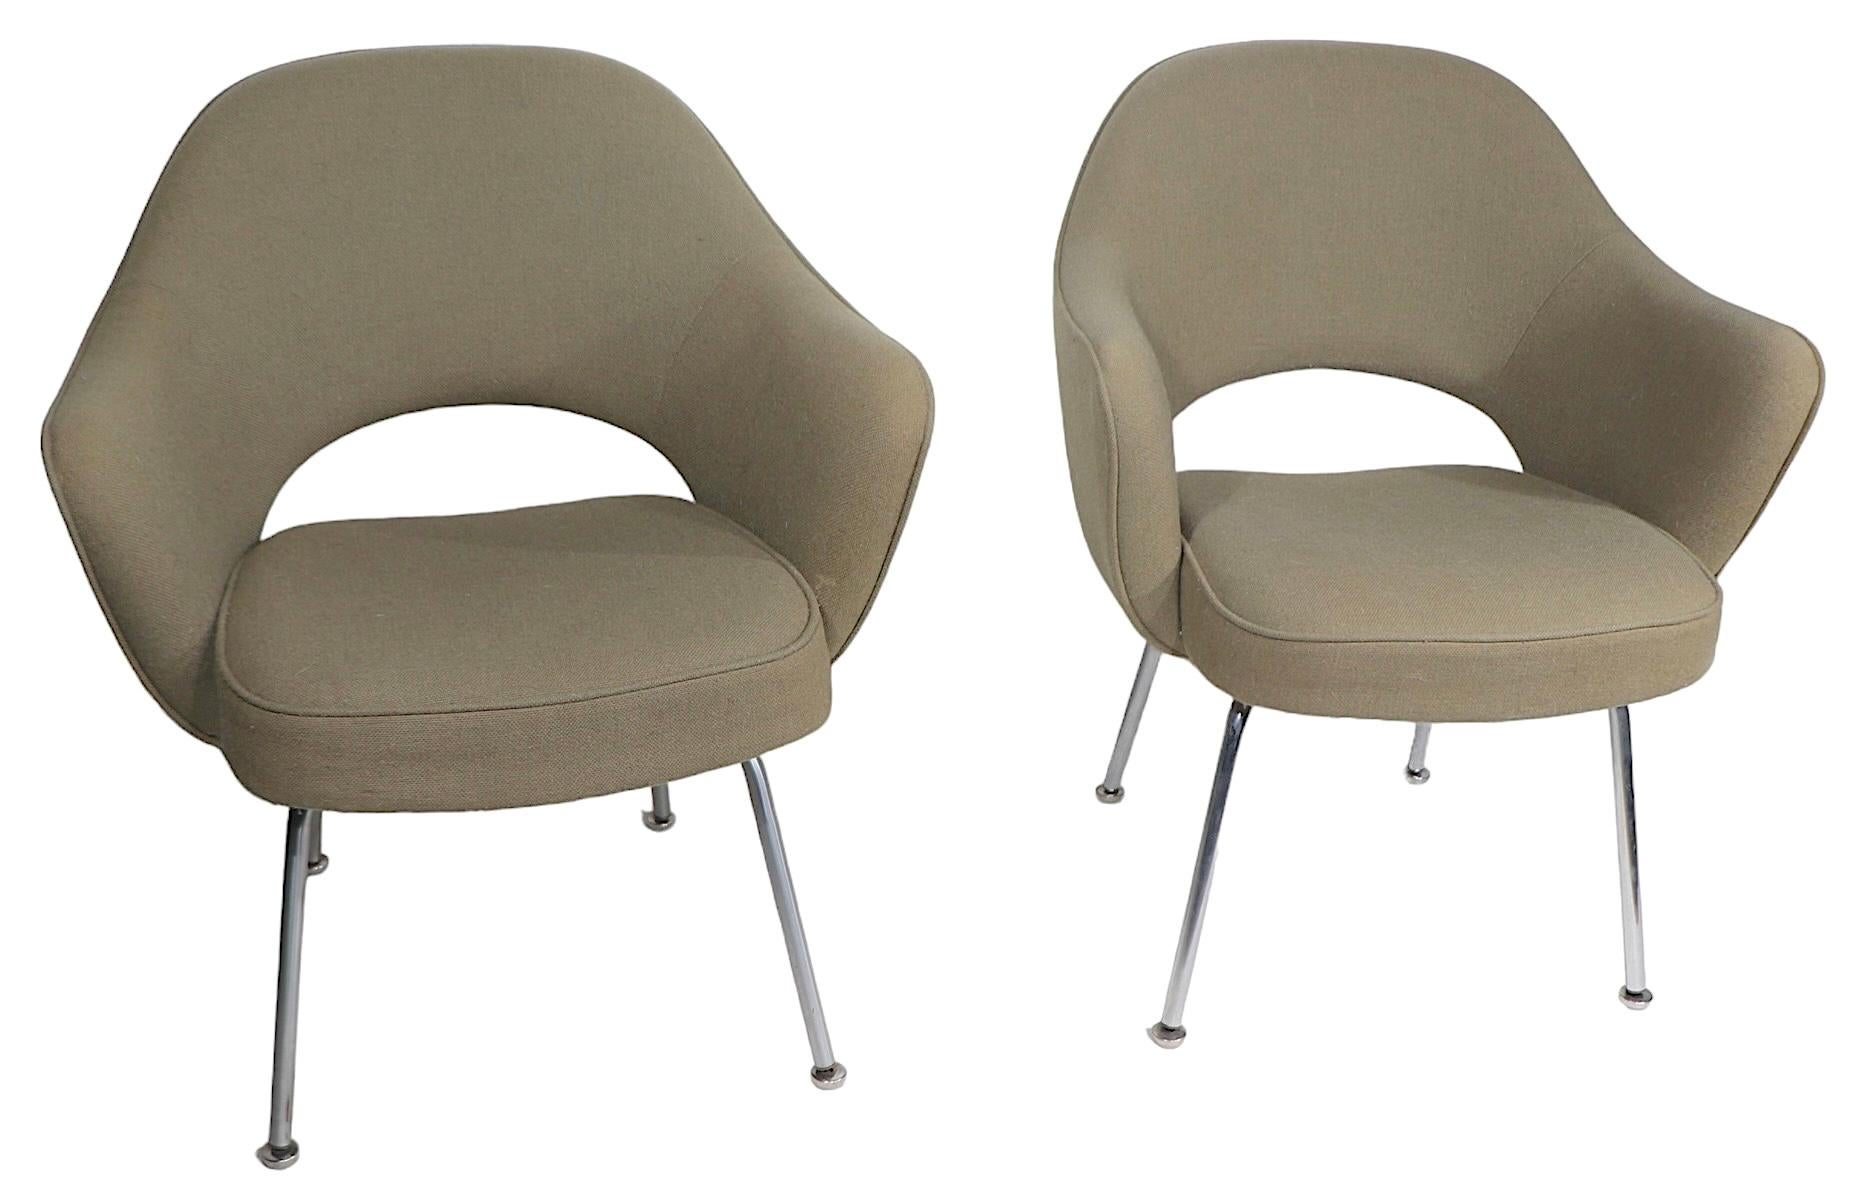 Pr. Vintage Saarinen for Knoll Executive Chairs c. 1960/70's For Sale 6